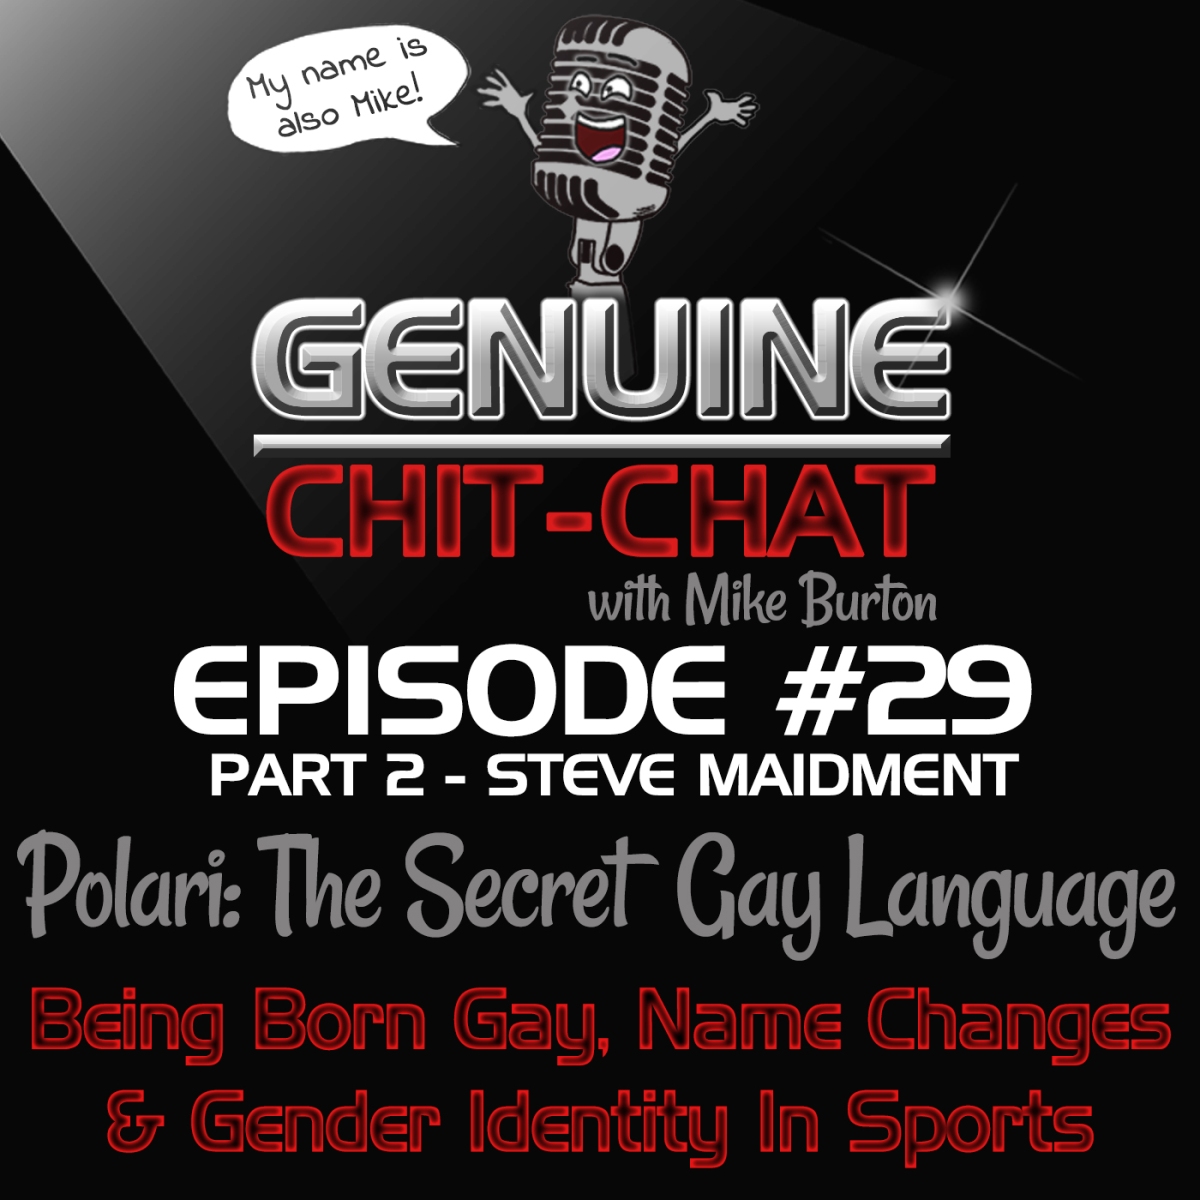 Polari: The Secret Gay Language – Being Born Gay, Name Changes & Gender Identity In Sports: GCC #29 Part 2 with Steve Maidment